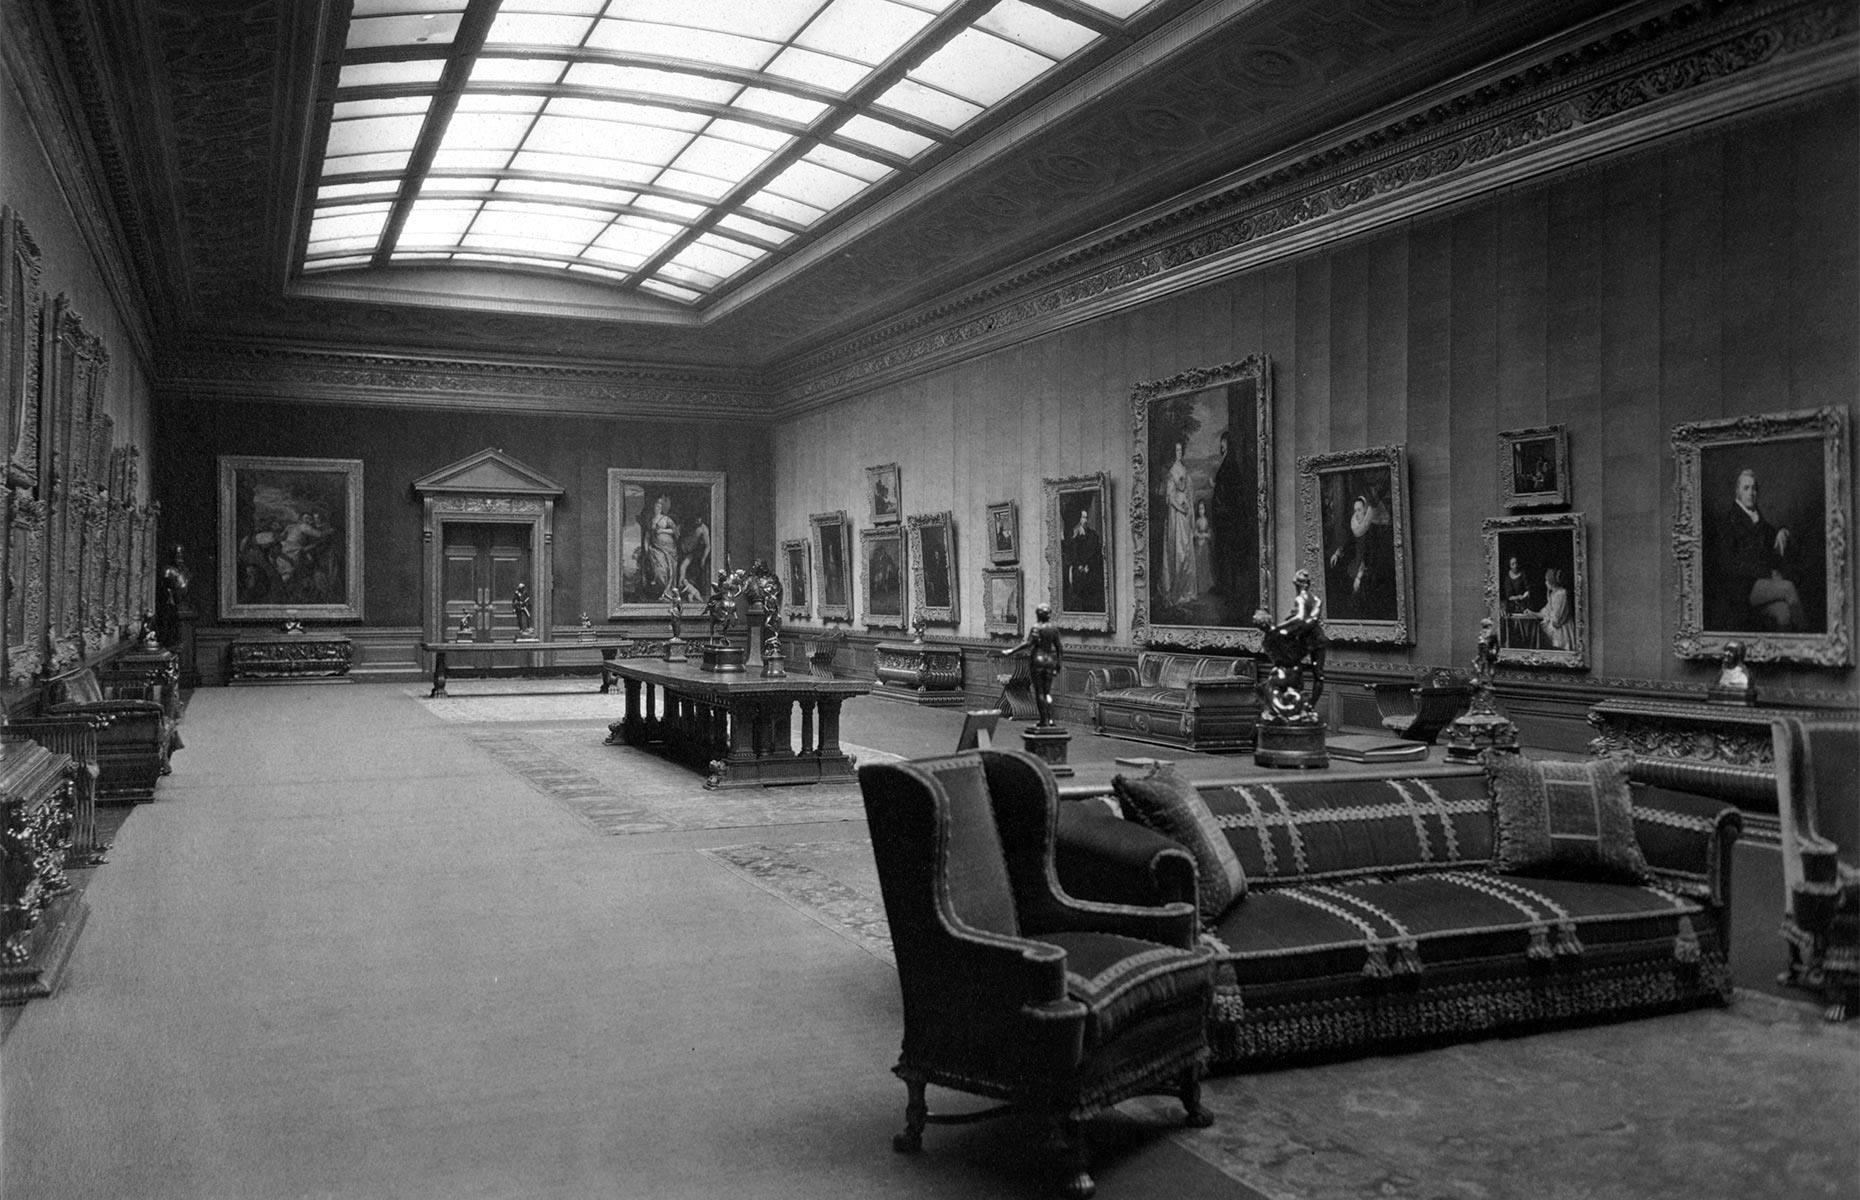 <p>However, the most impressive rooms in the home were the East and West Galleries, each topped with concave glass ceilings and intricately carved cornices.</p>  <p>Tragically, Frick only lived in the property for five years before his death in 1919. In his will, the industrialist tycoon gifted the home and its entire contents, art collection included, to the American people, along with a $15 million (£12m) endowment to fund the eponymous art museum, which opened in 1935.</p>